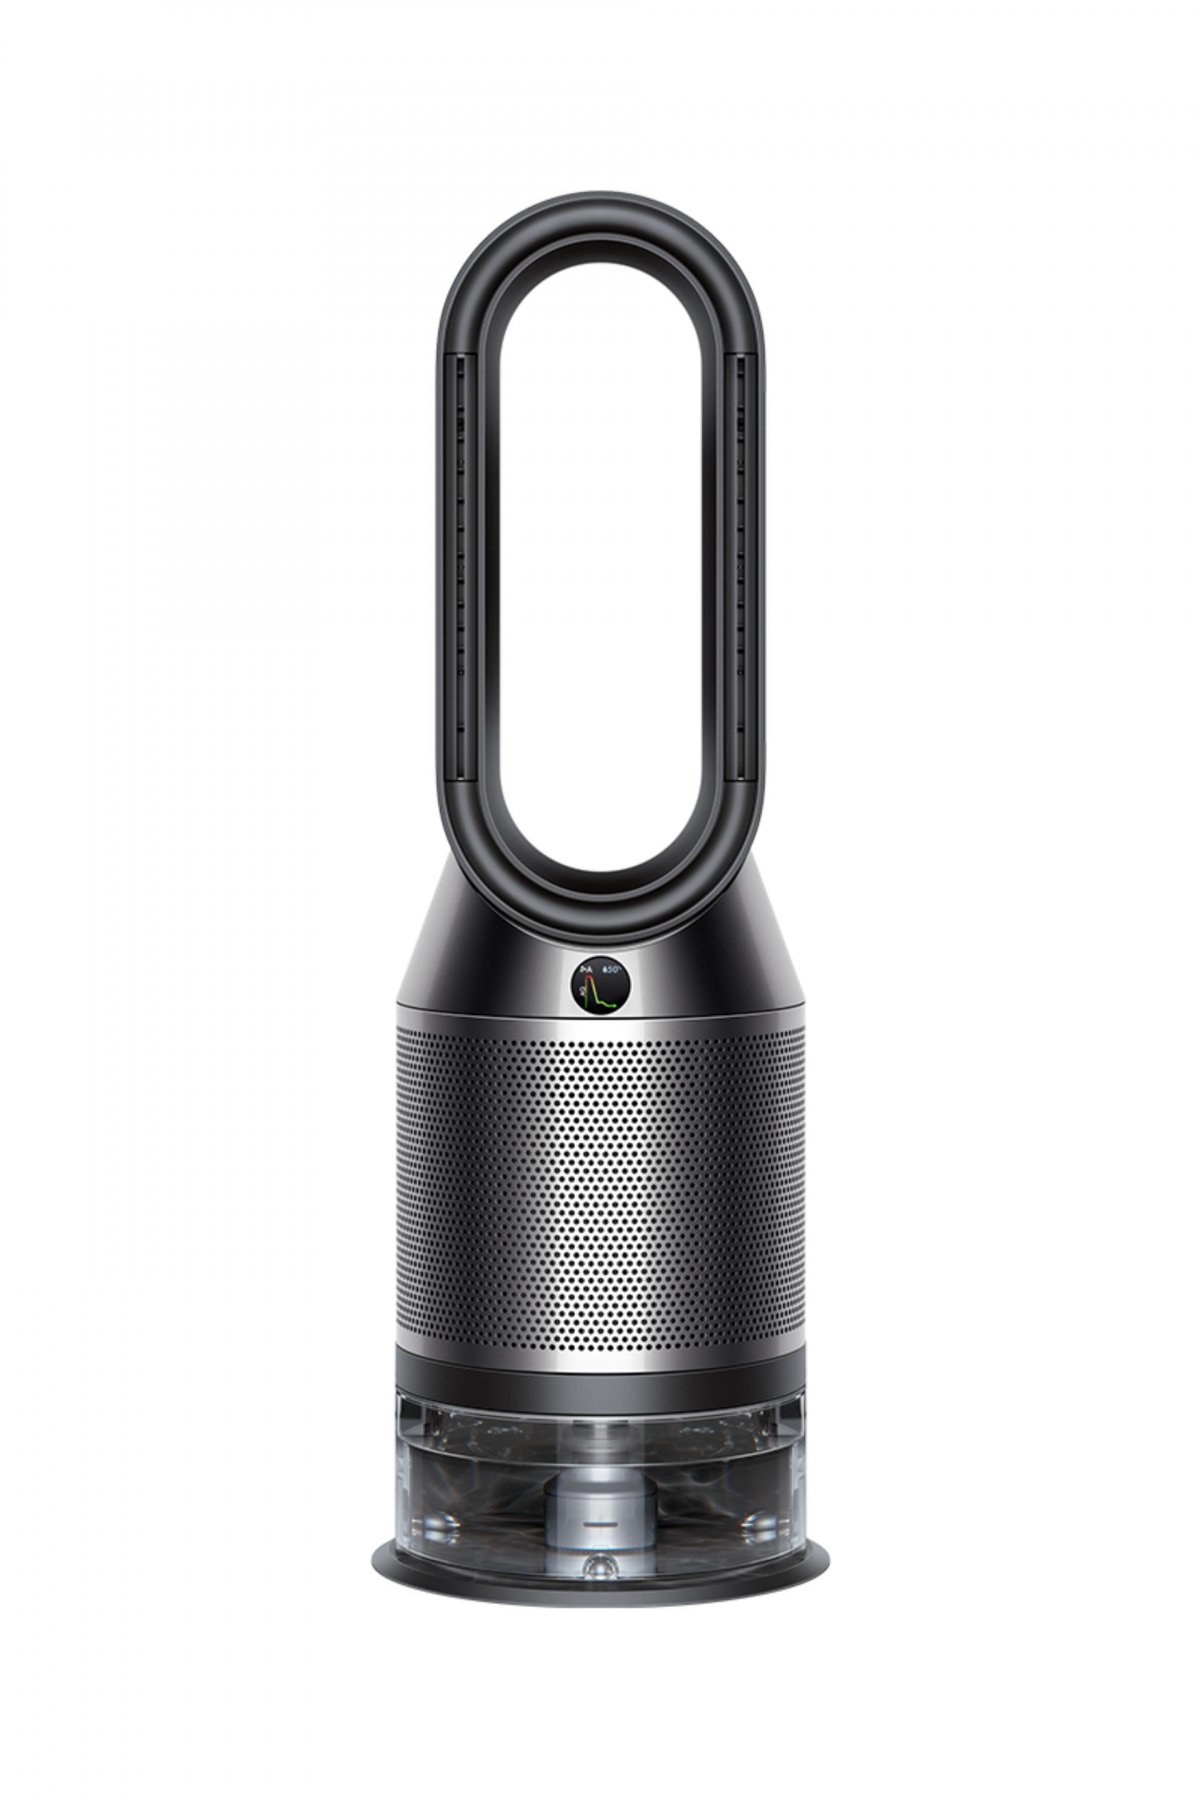 The Dyson Pure Humidify+Cool air purifier. 